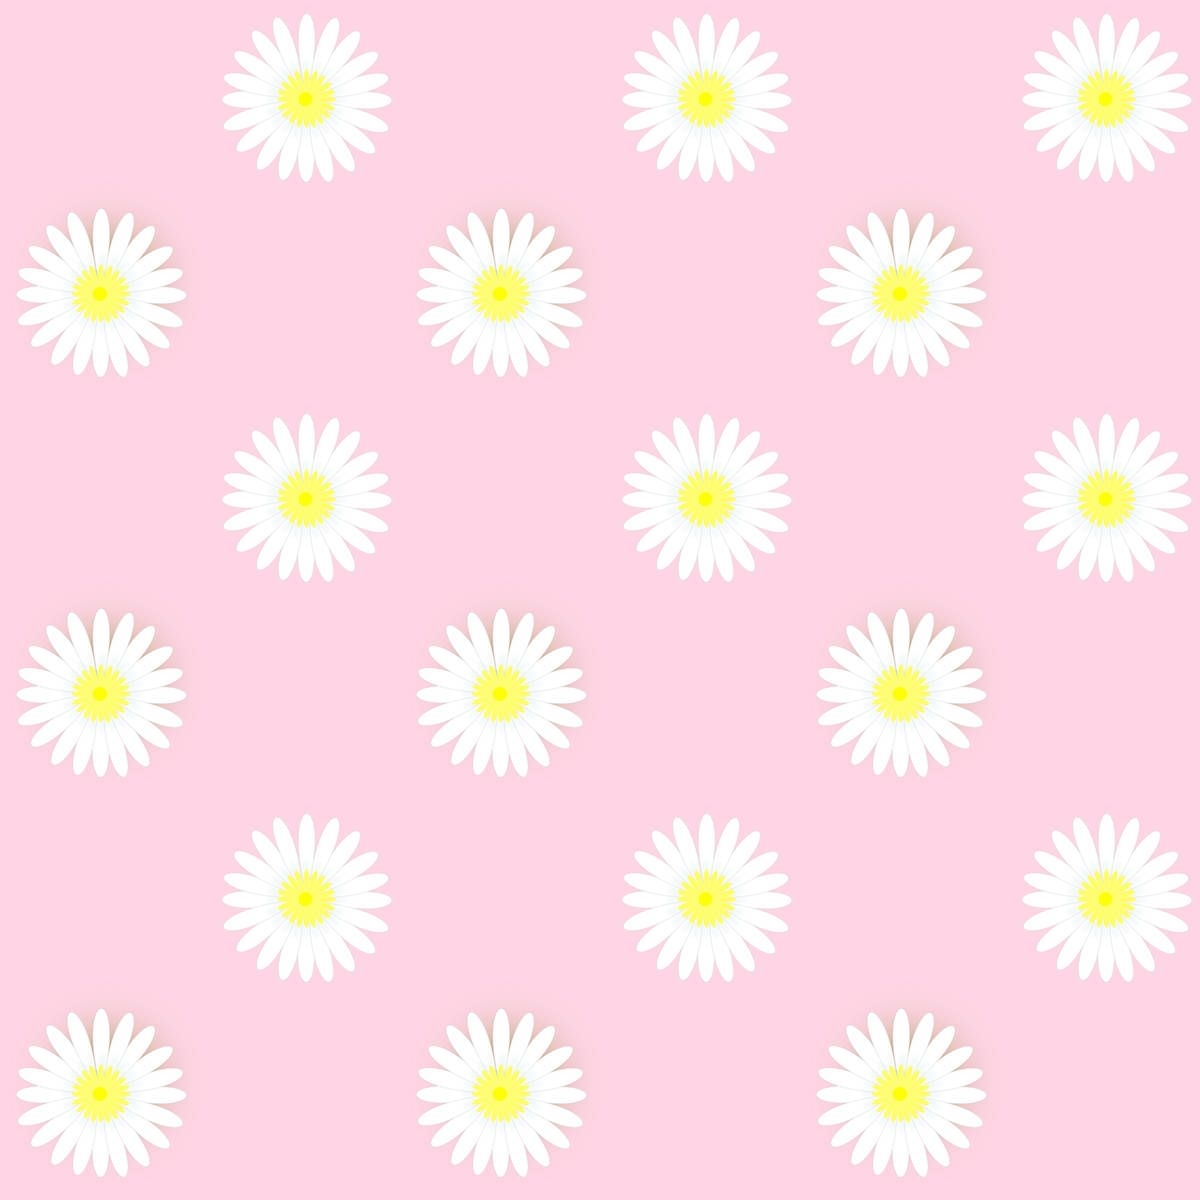 White Daisy Patterned In Pastel Pink Background